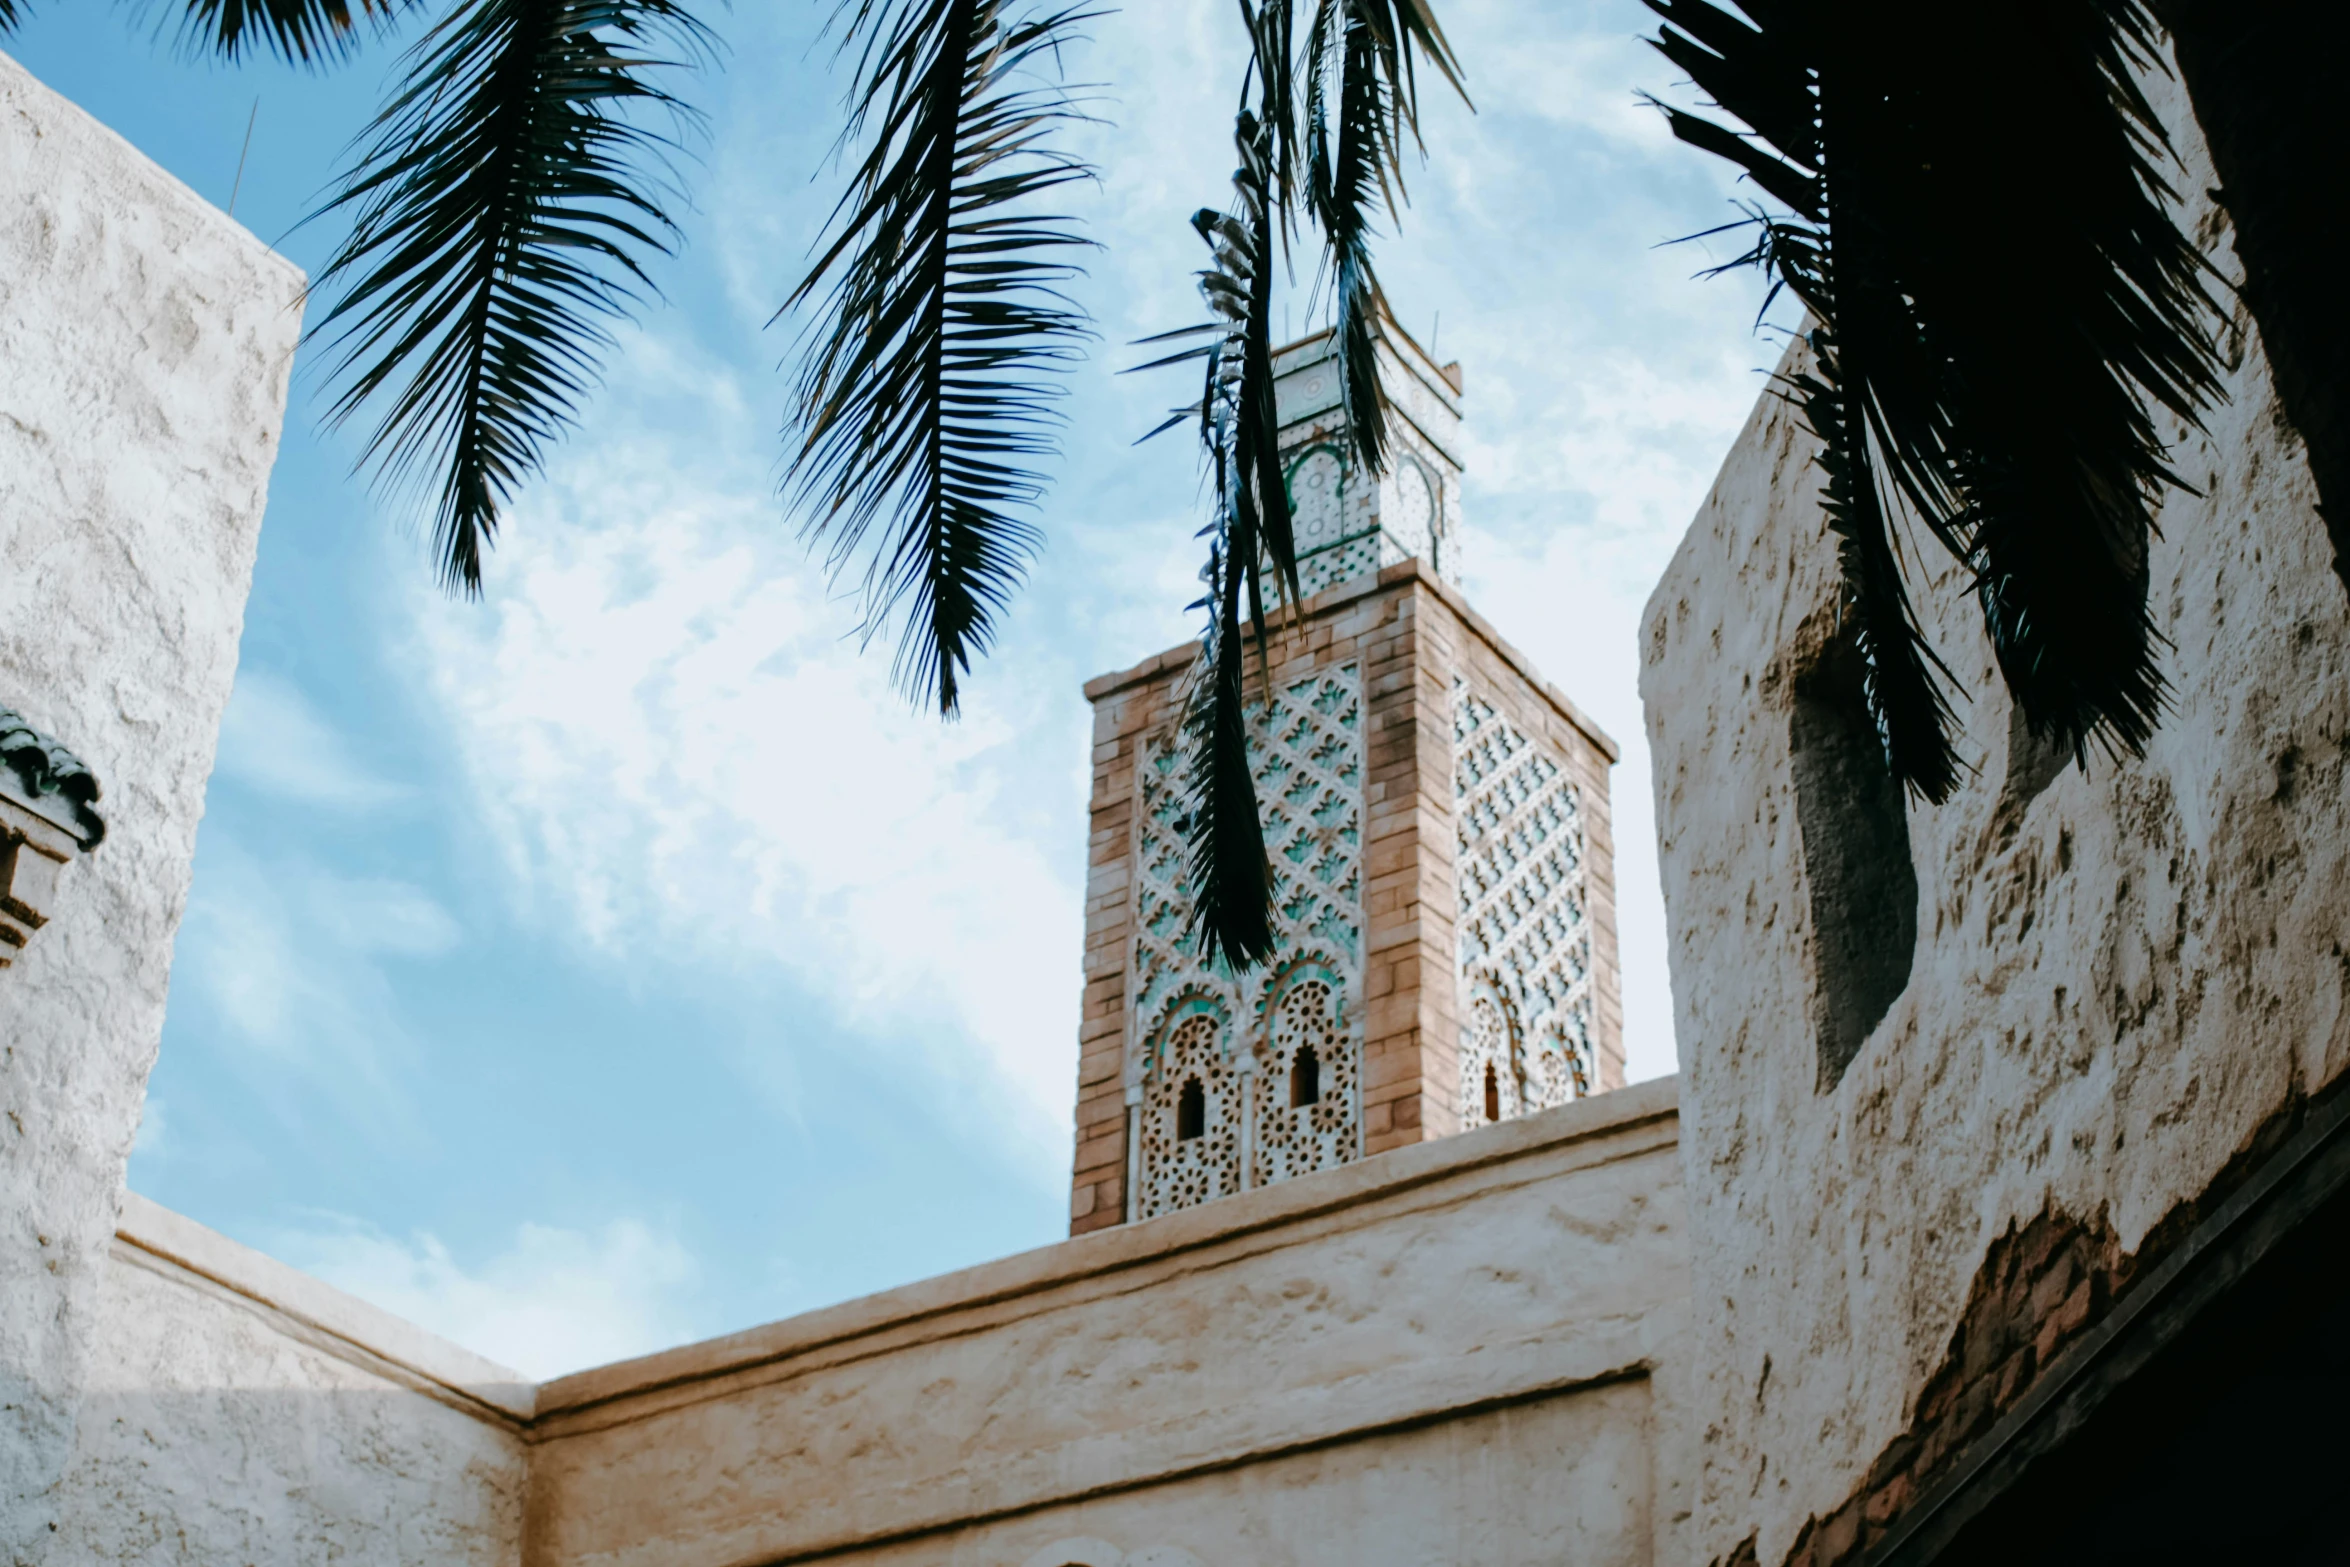 a clock tower surrounded by palm trees and blue sky